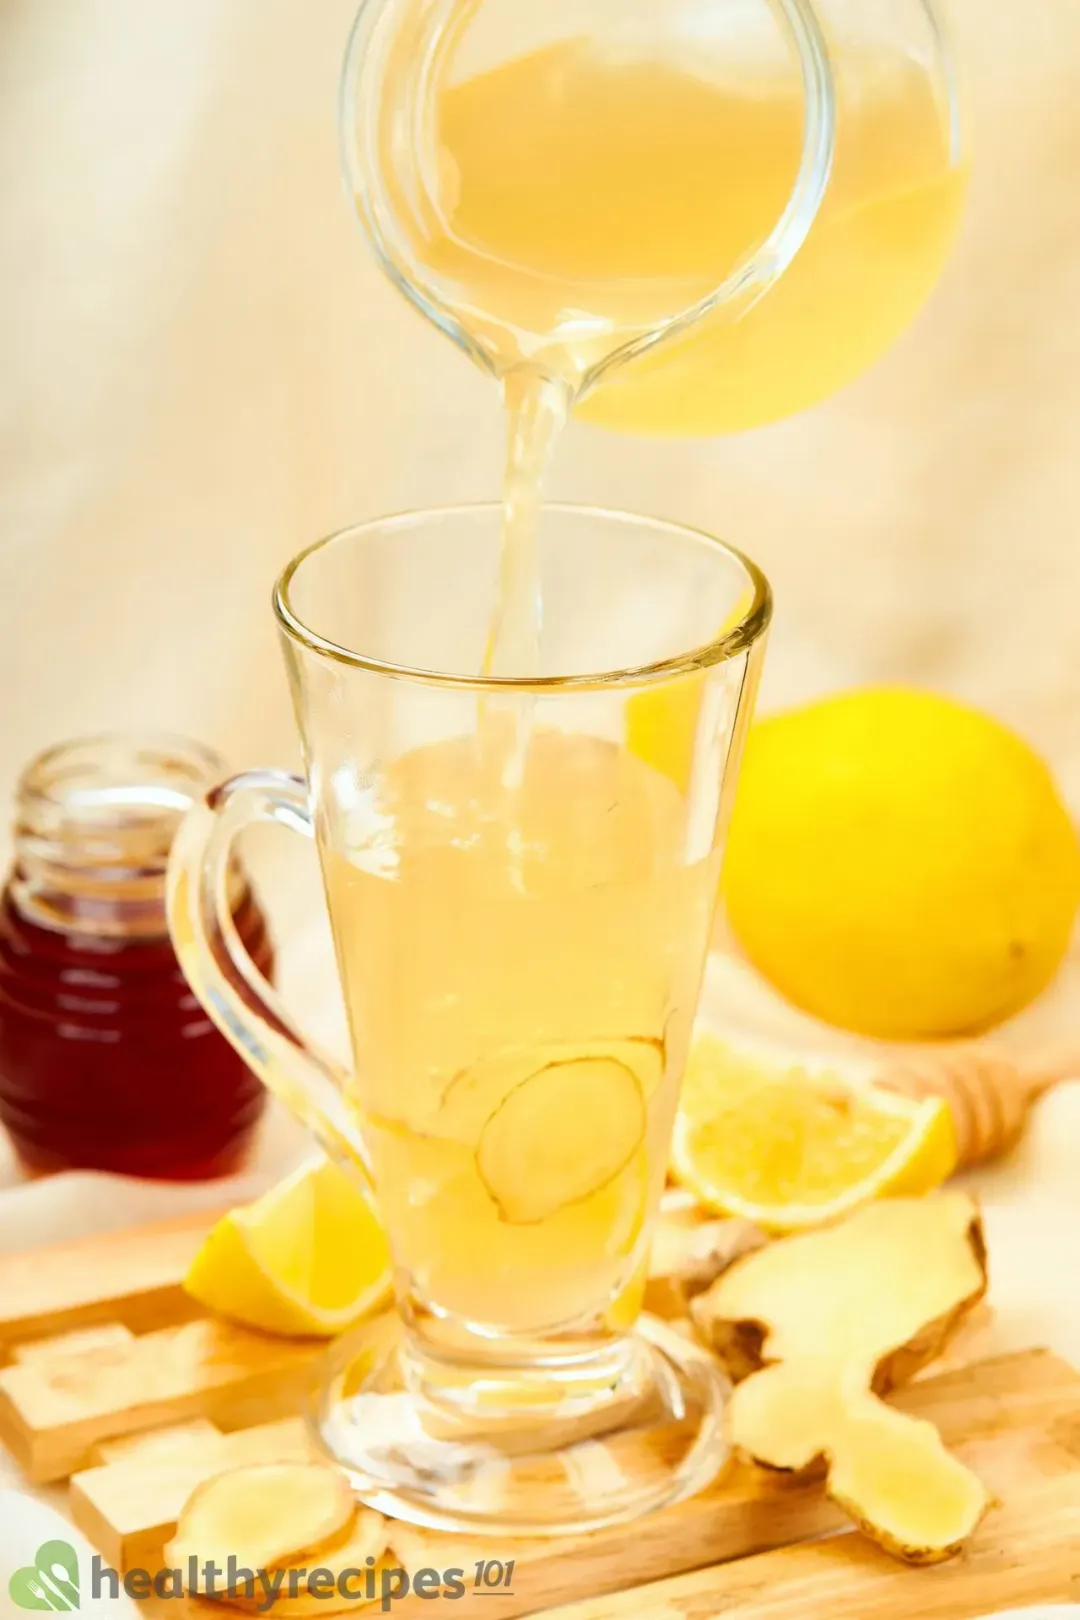 A pitcher of lemon honey ginger vinegar drink pouring into a shot glass with handle, next to some lemons and ginger